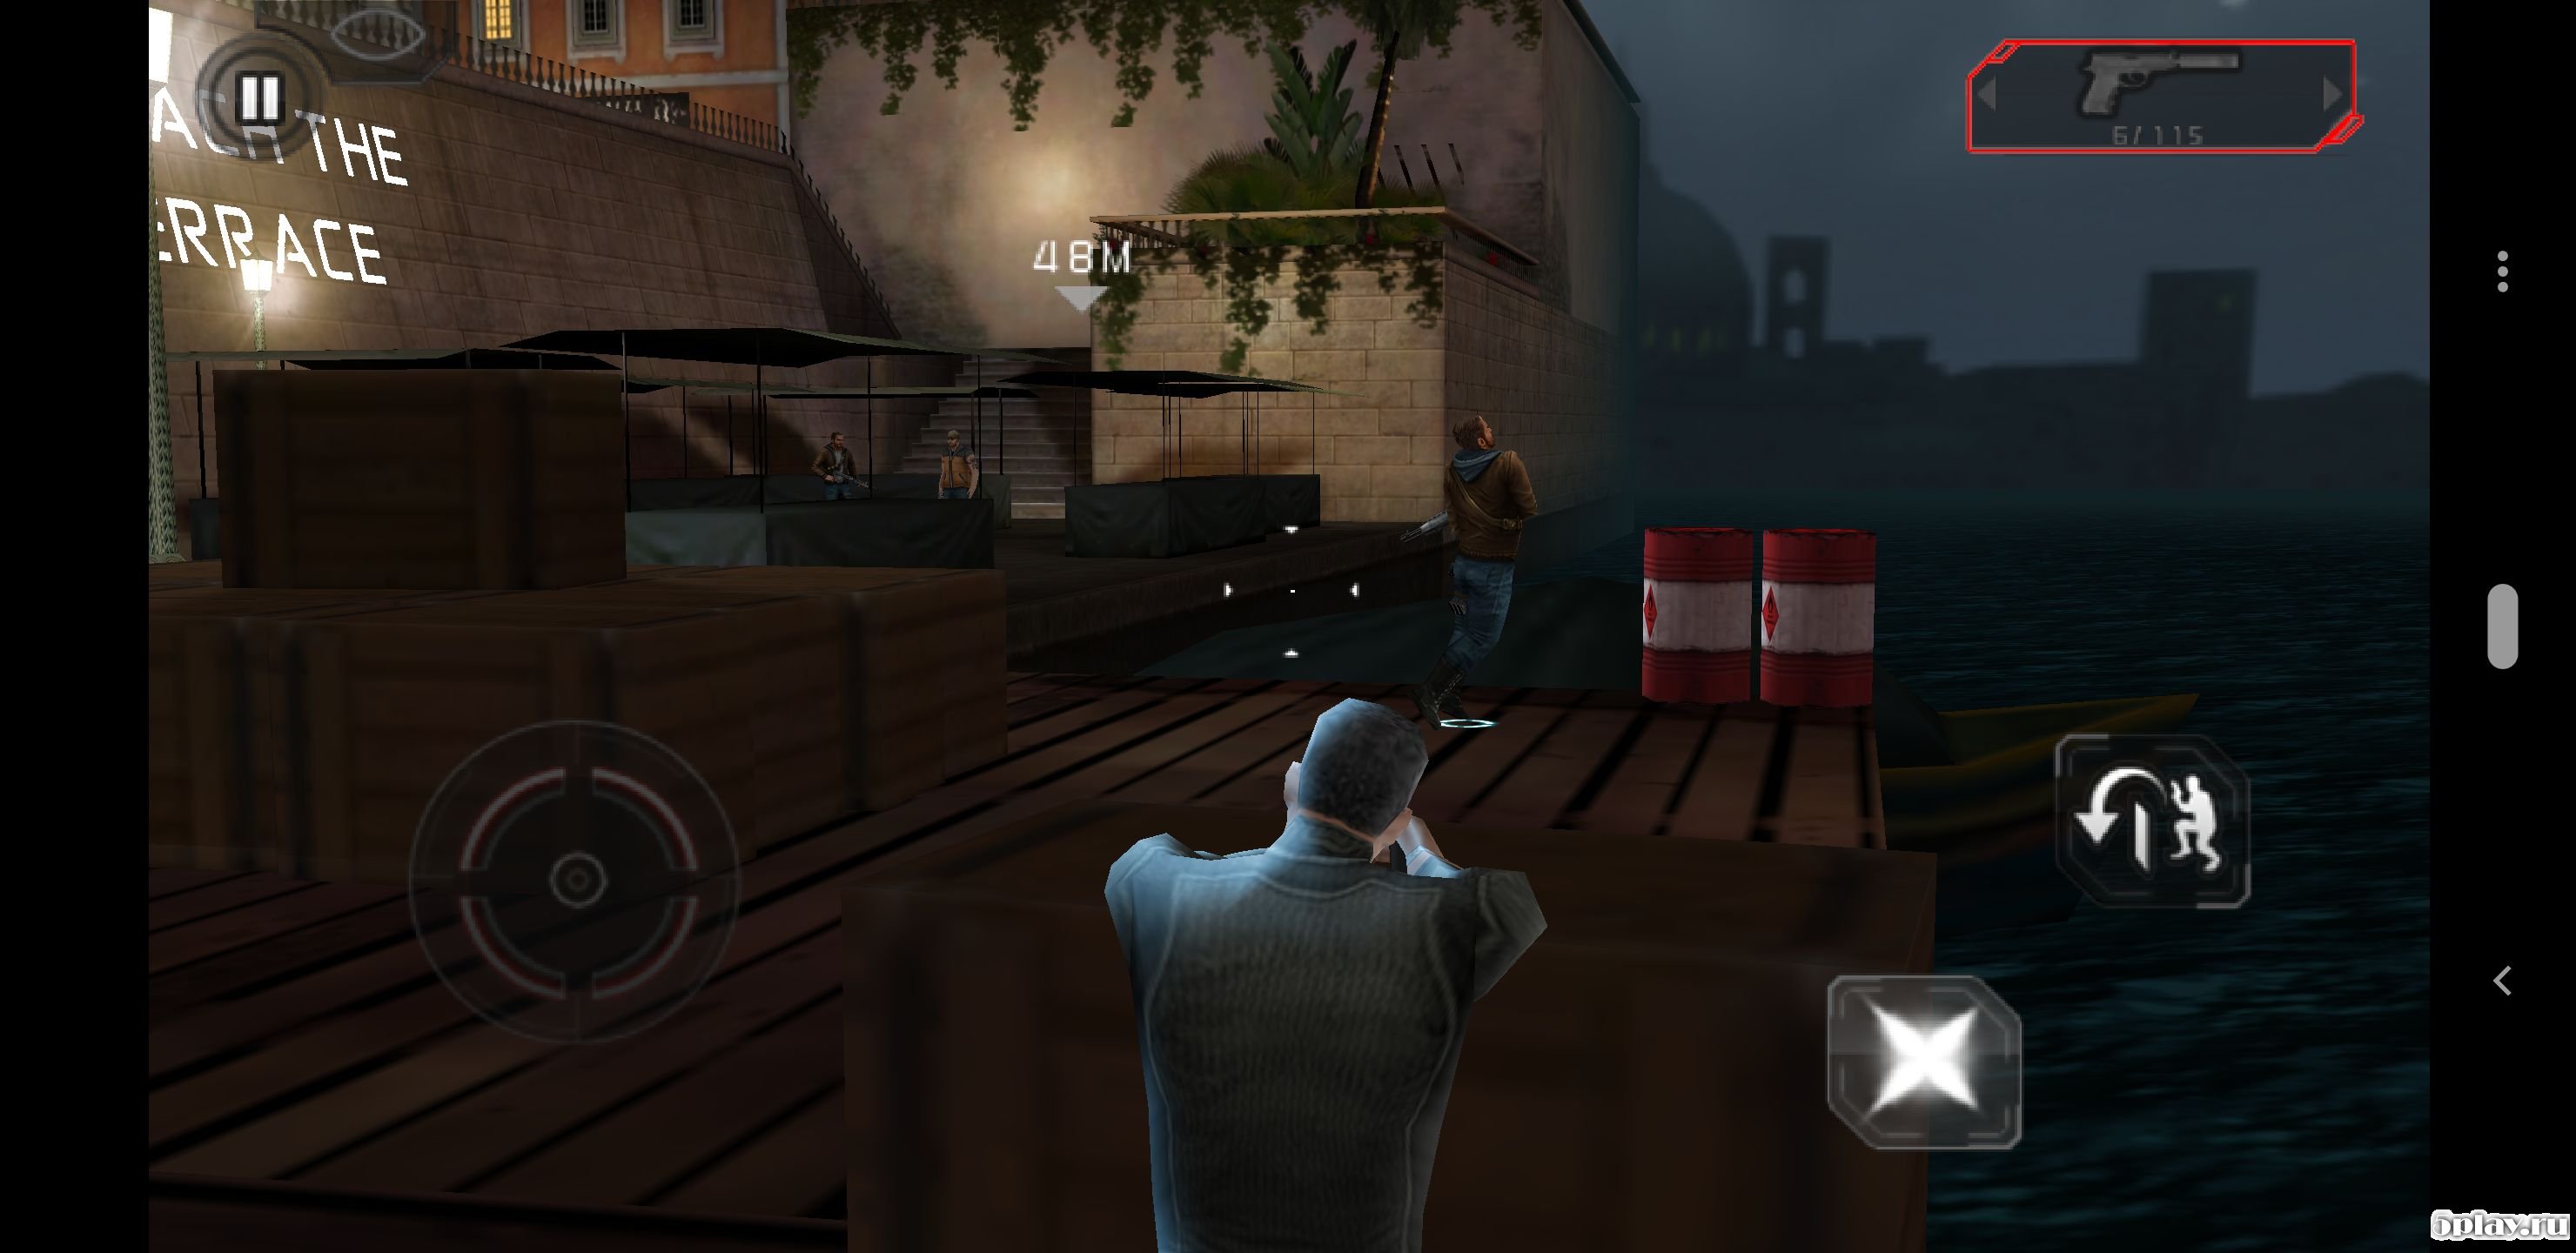 splinter cell conviction game download for android